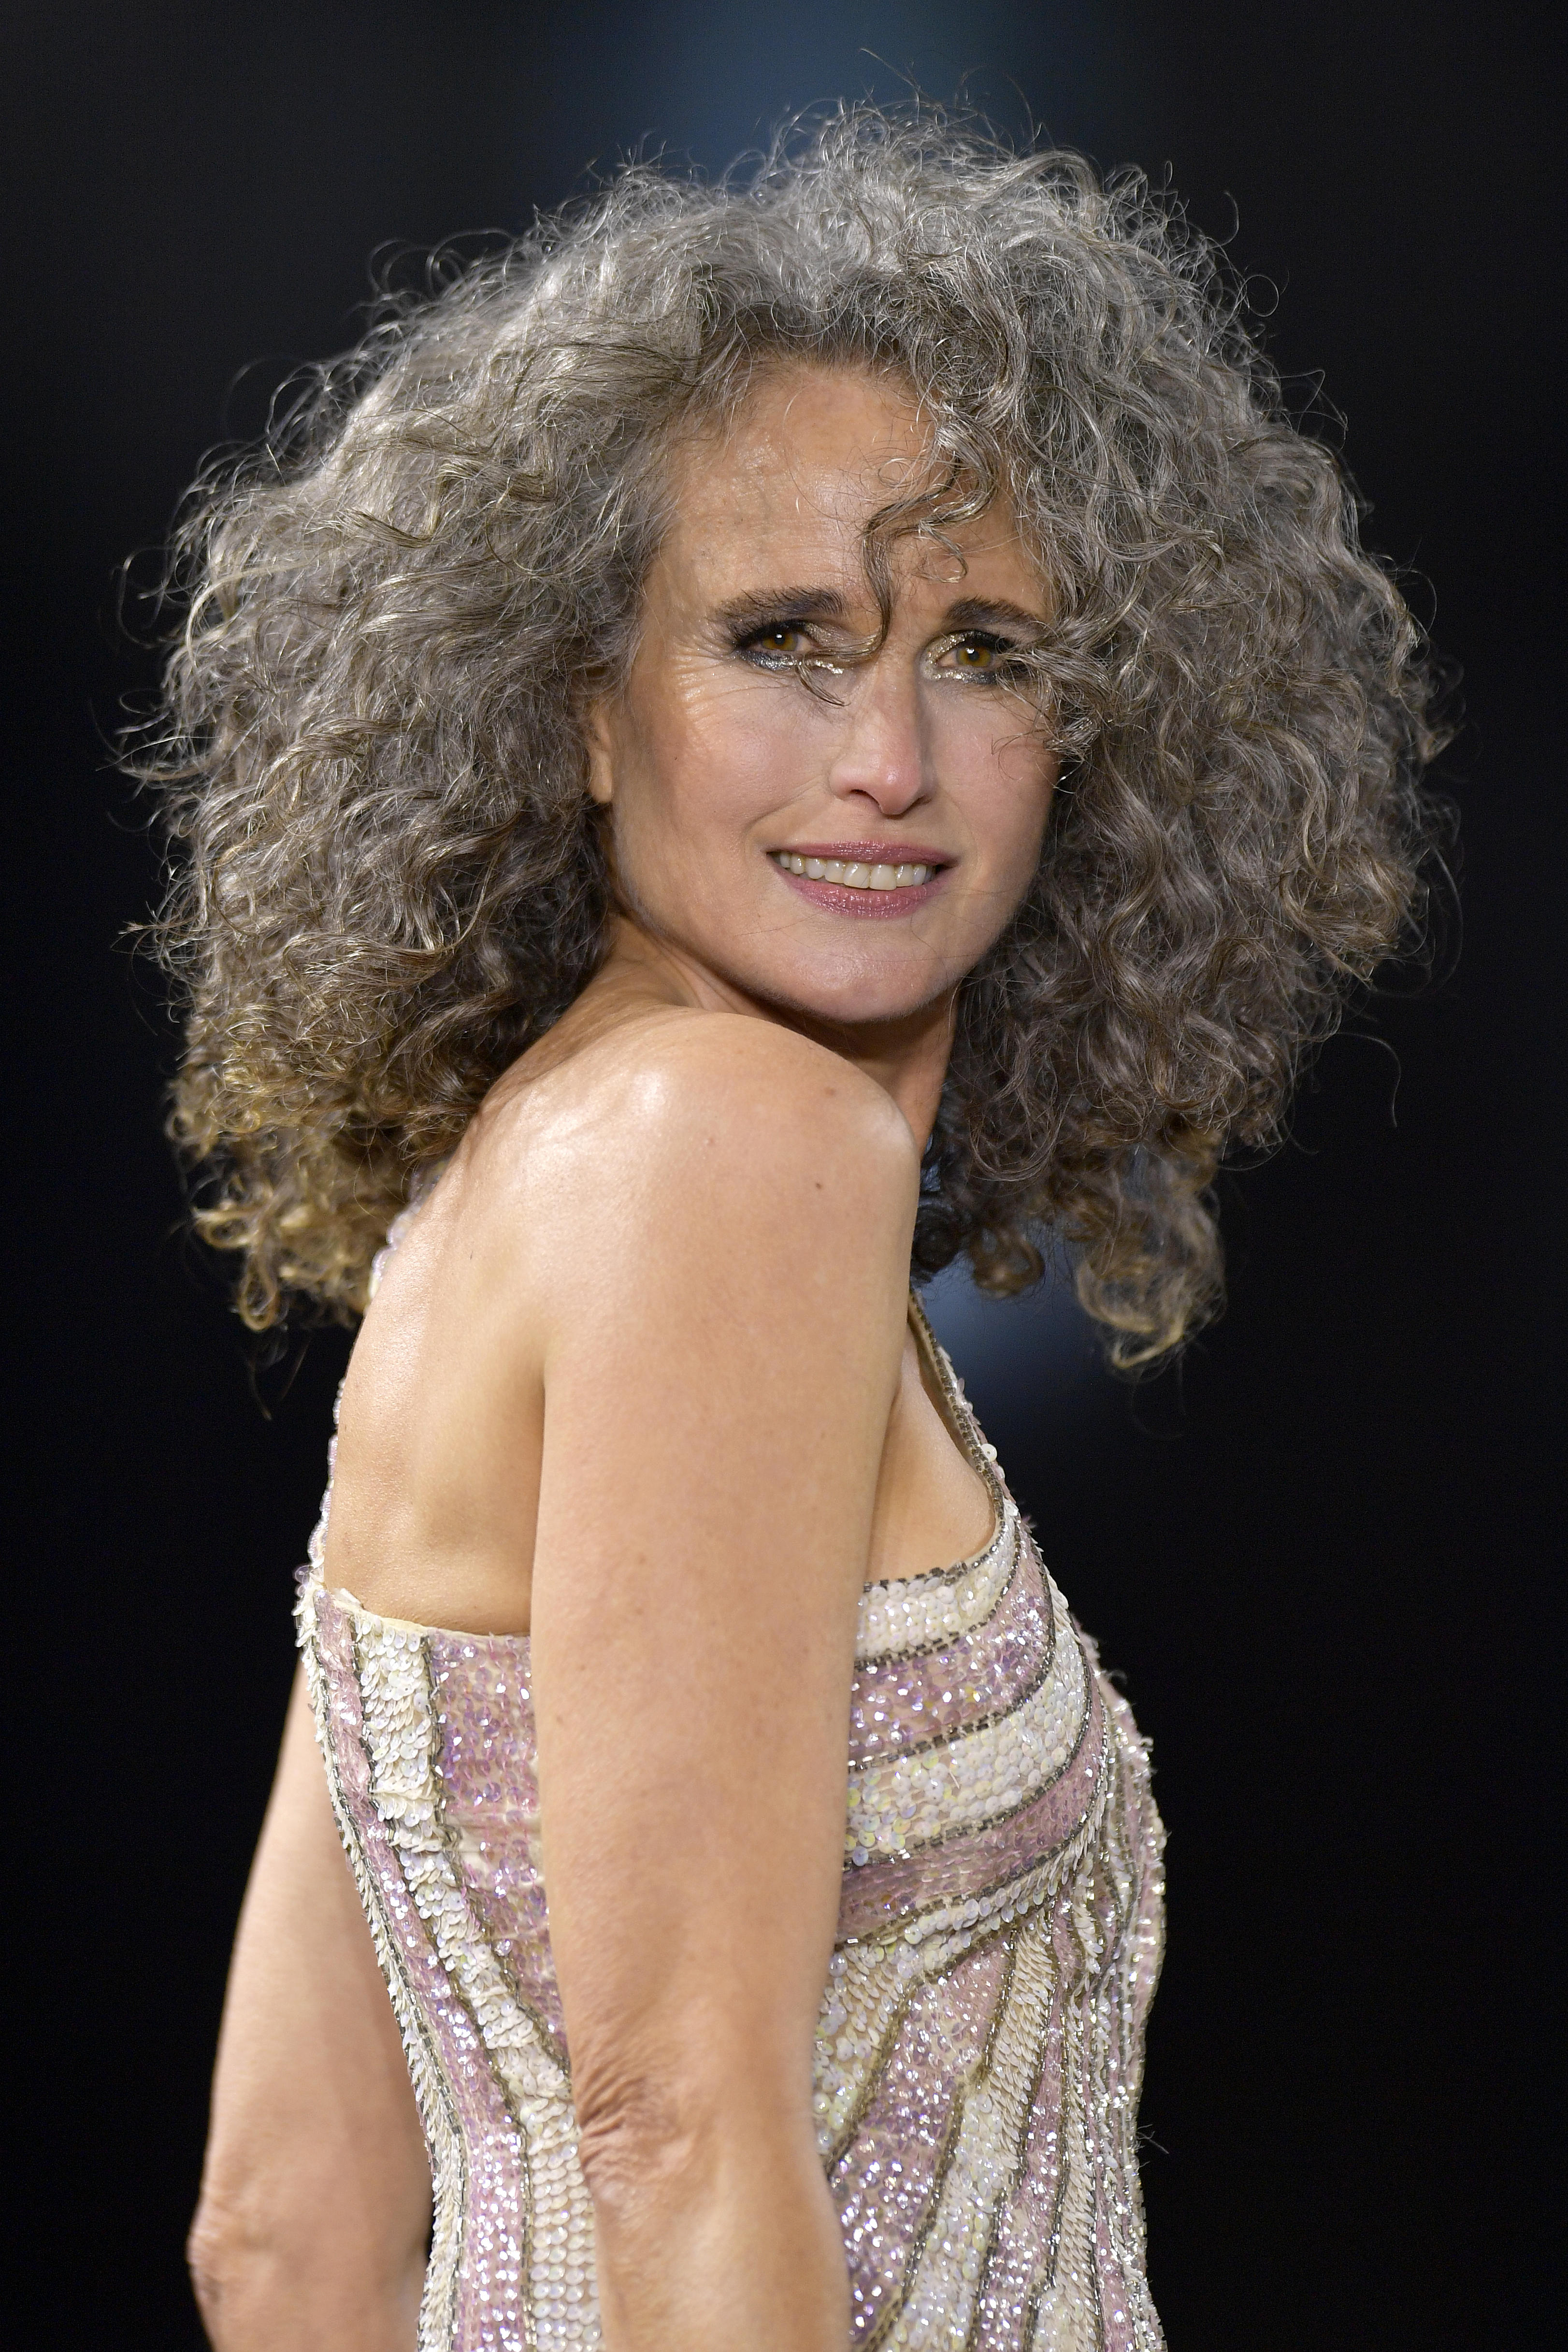 Andie MacDowell walks the runway during the "Le Defile Walk Your Worth" By L'Oreal Paris Womenswear Spring/Summer show as part of Paris Fashion Week on October 2, 2022, in Paris, France | Source: Getty Images